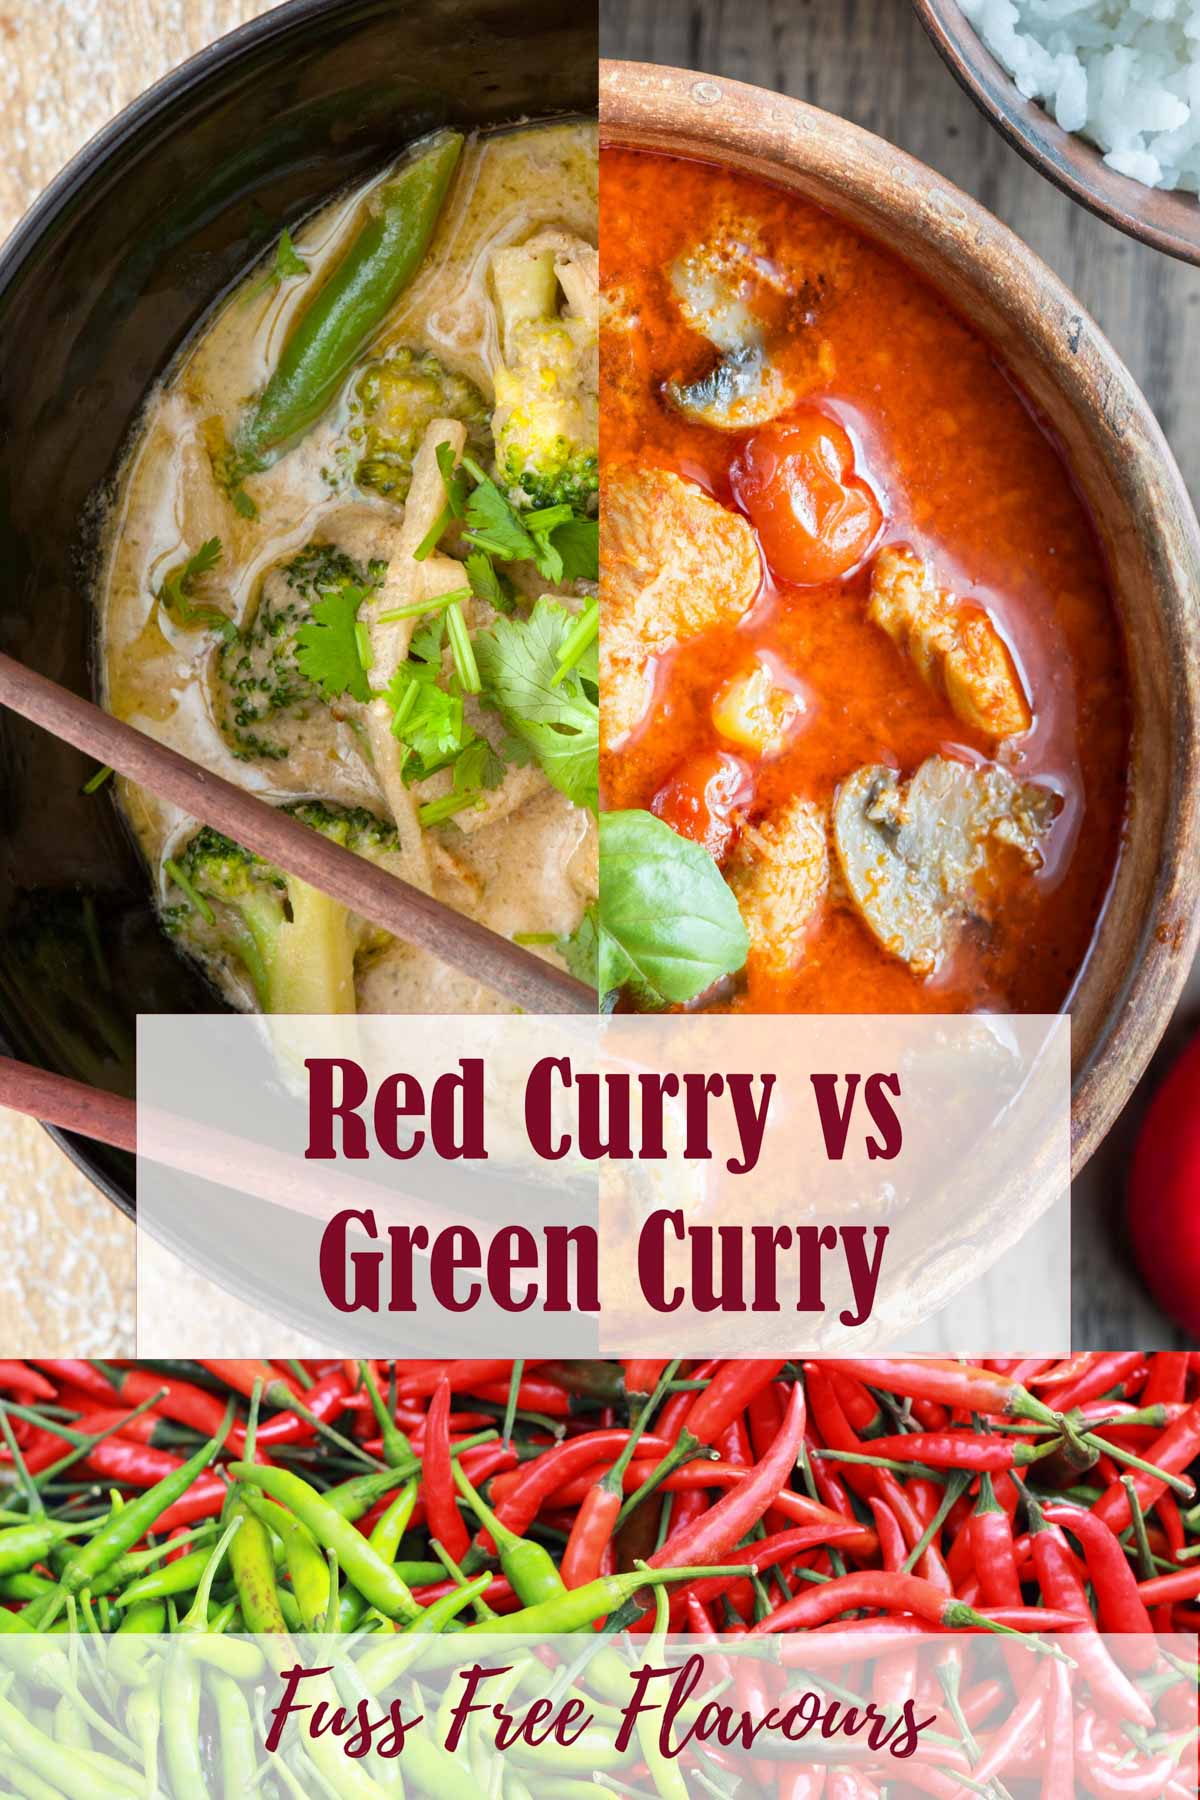 Red and green Thai curries contrasted, with the red and green chillies that give them their flavour.